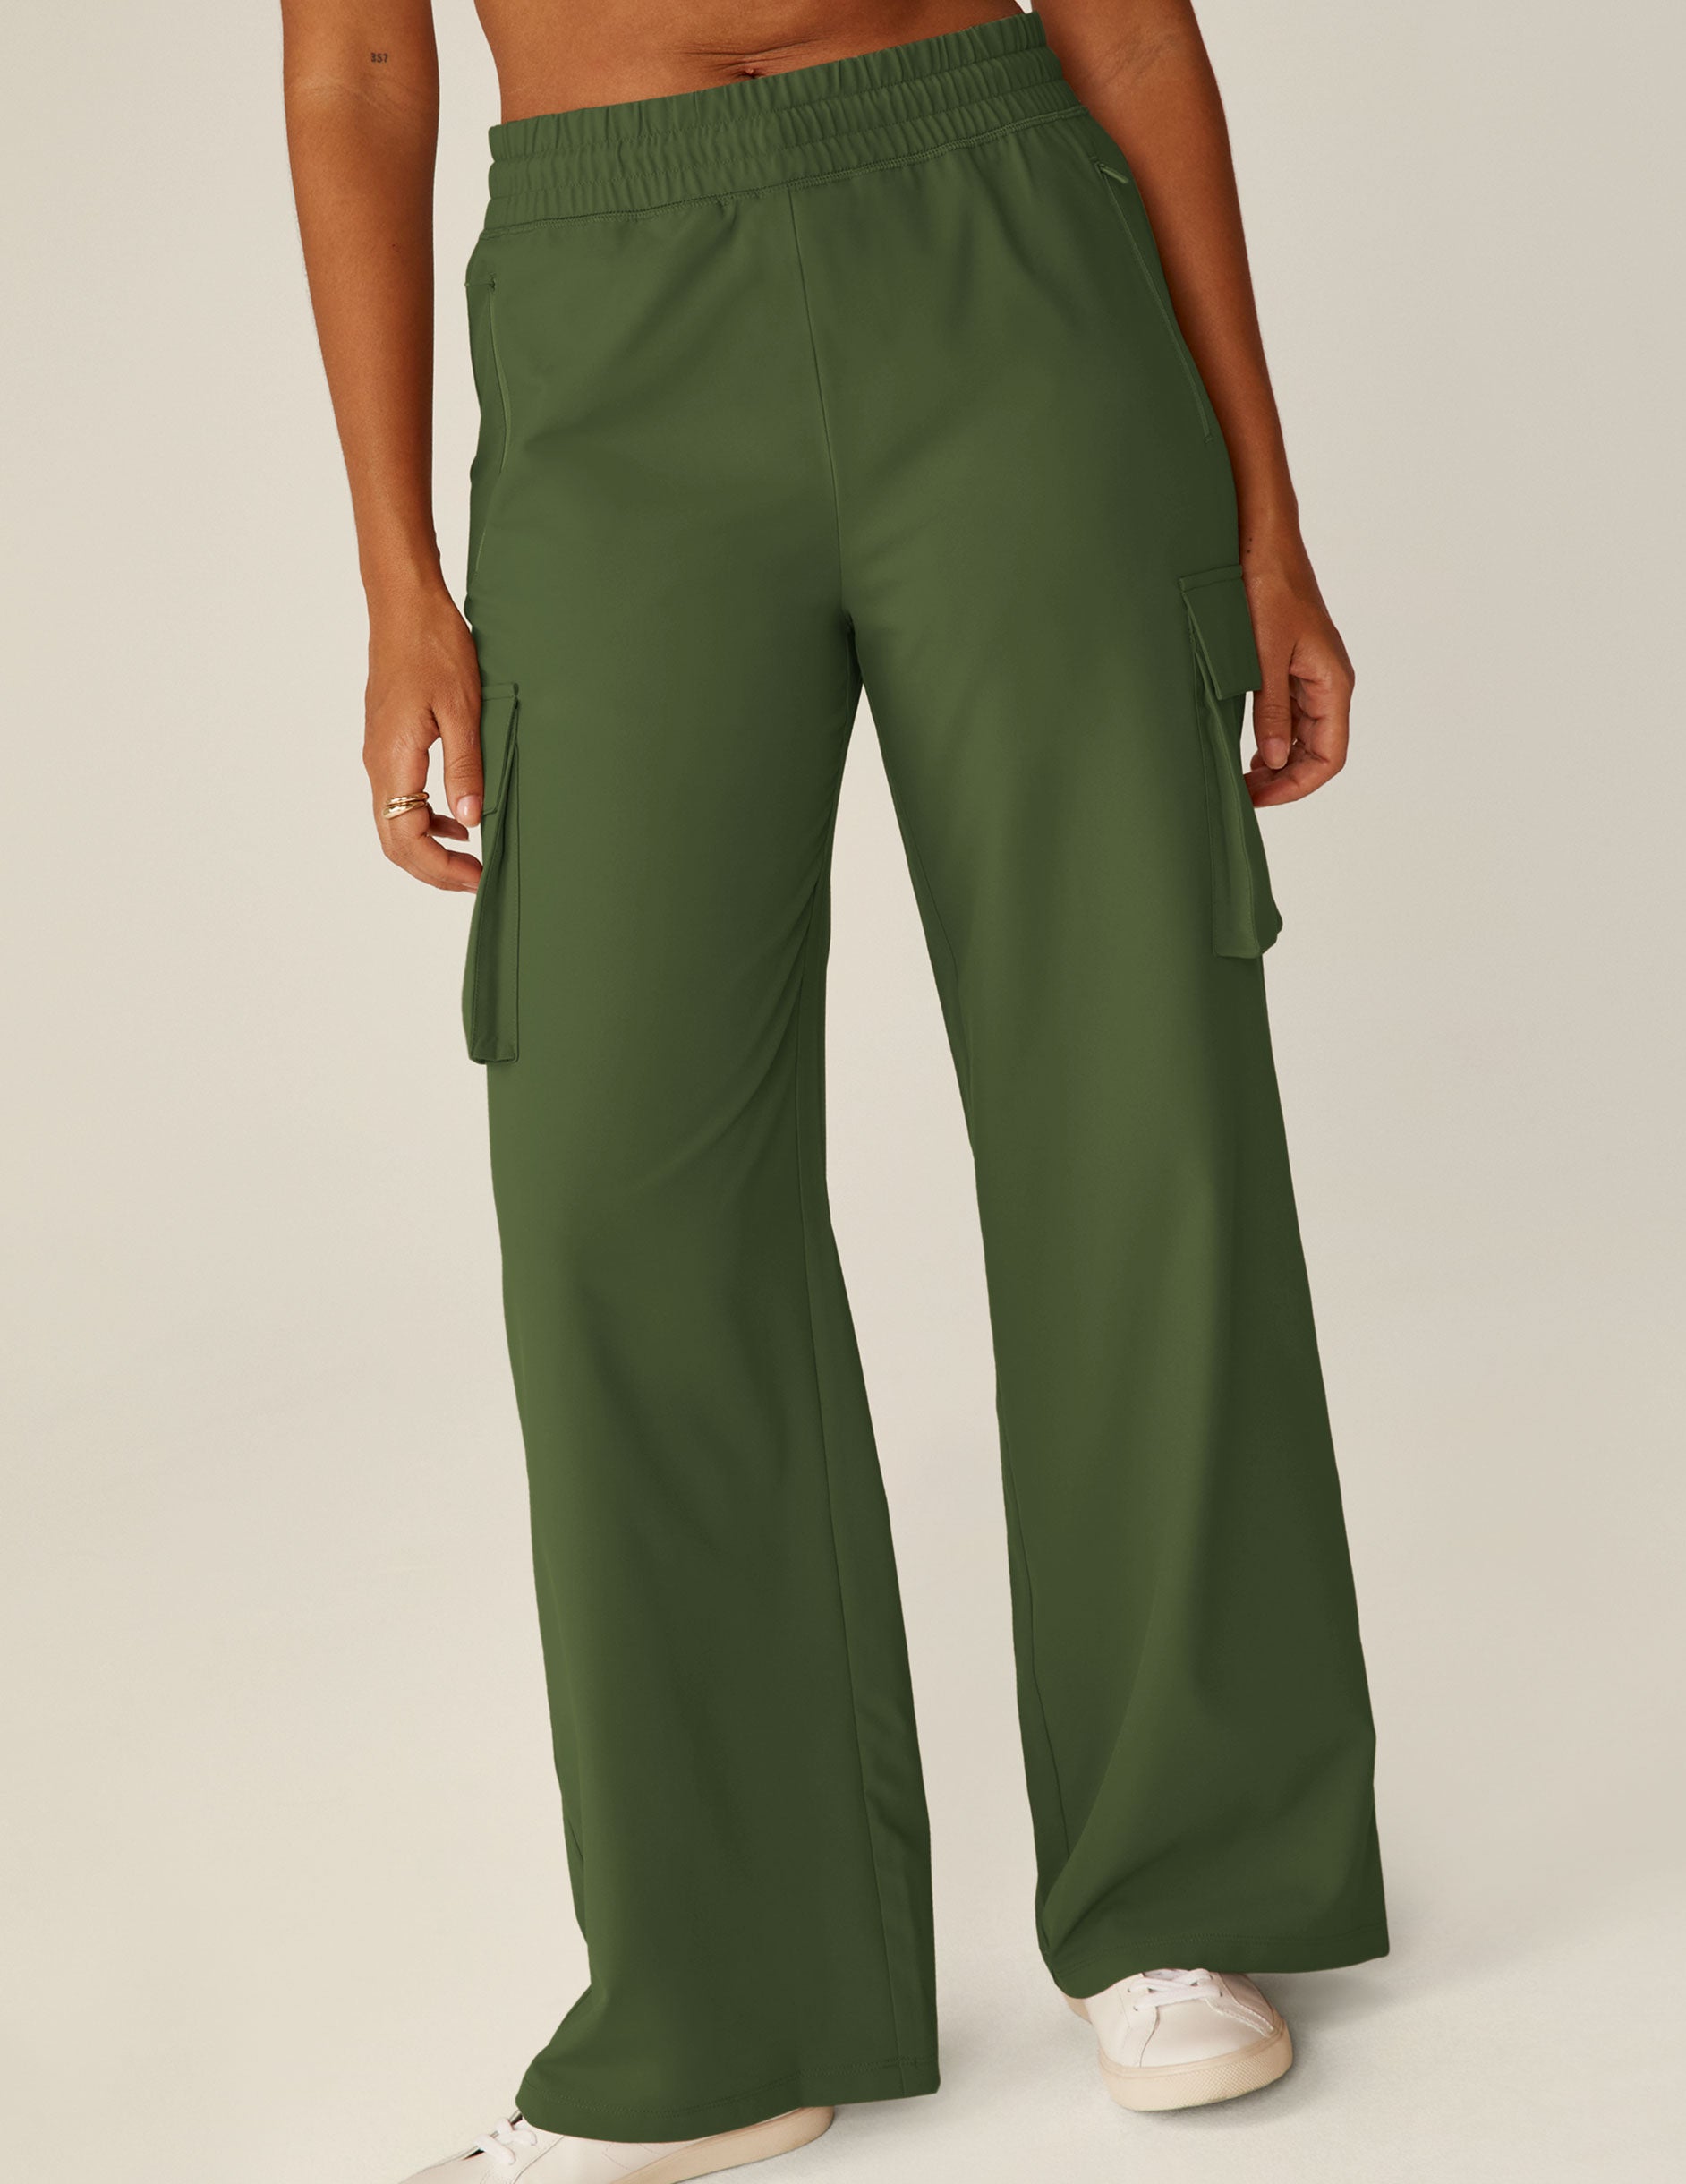 green jetstretch pants with cargo style pockets on the side of each leg.